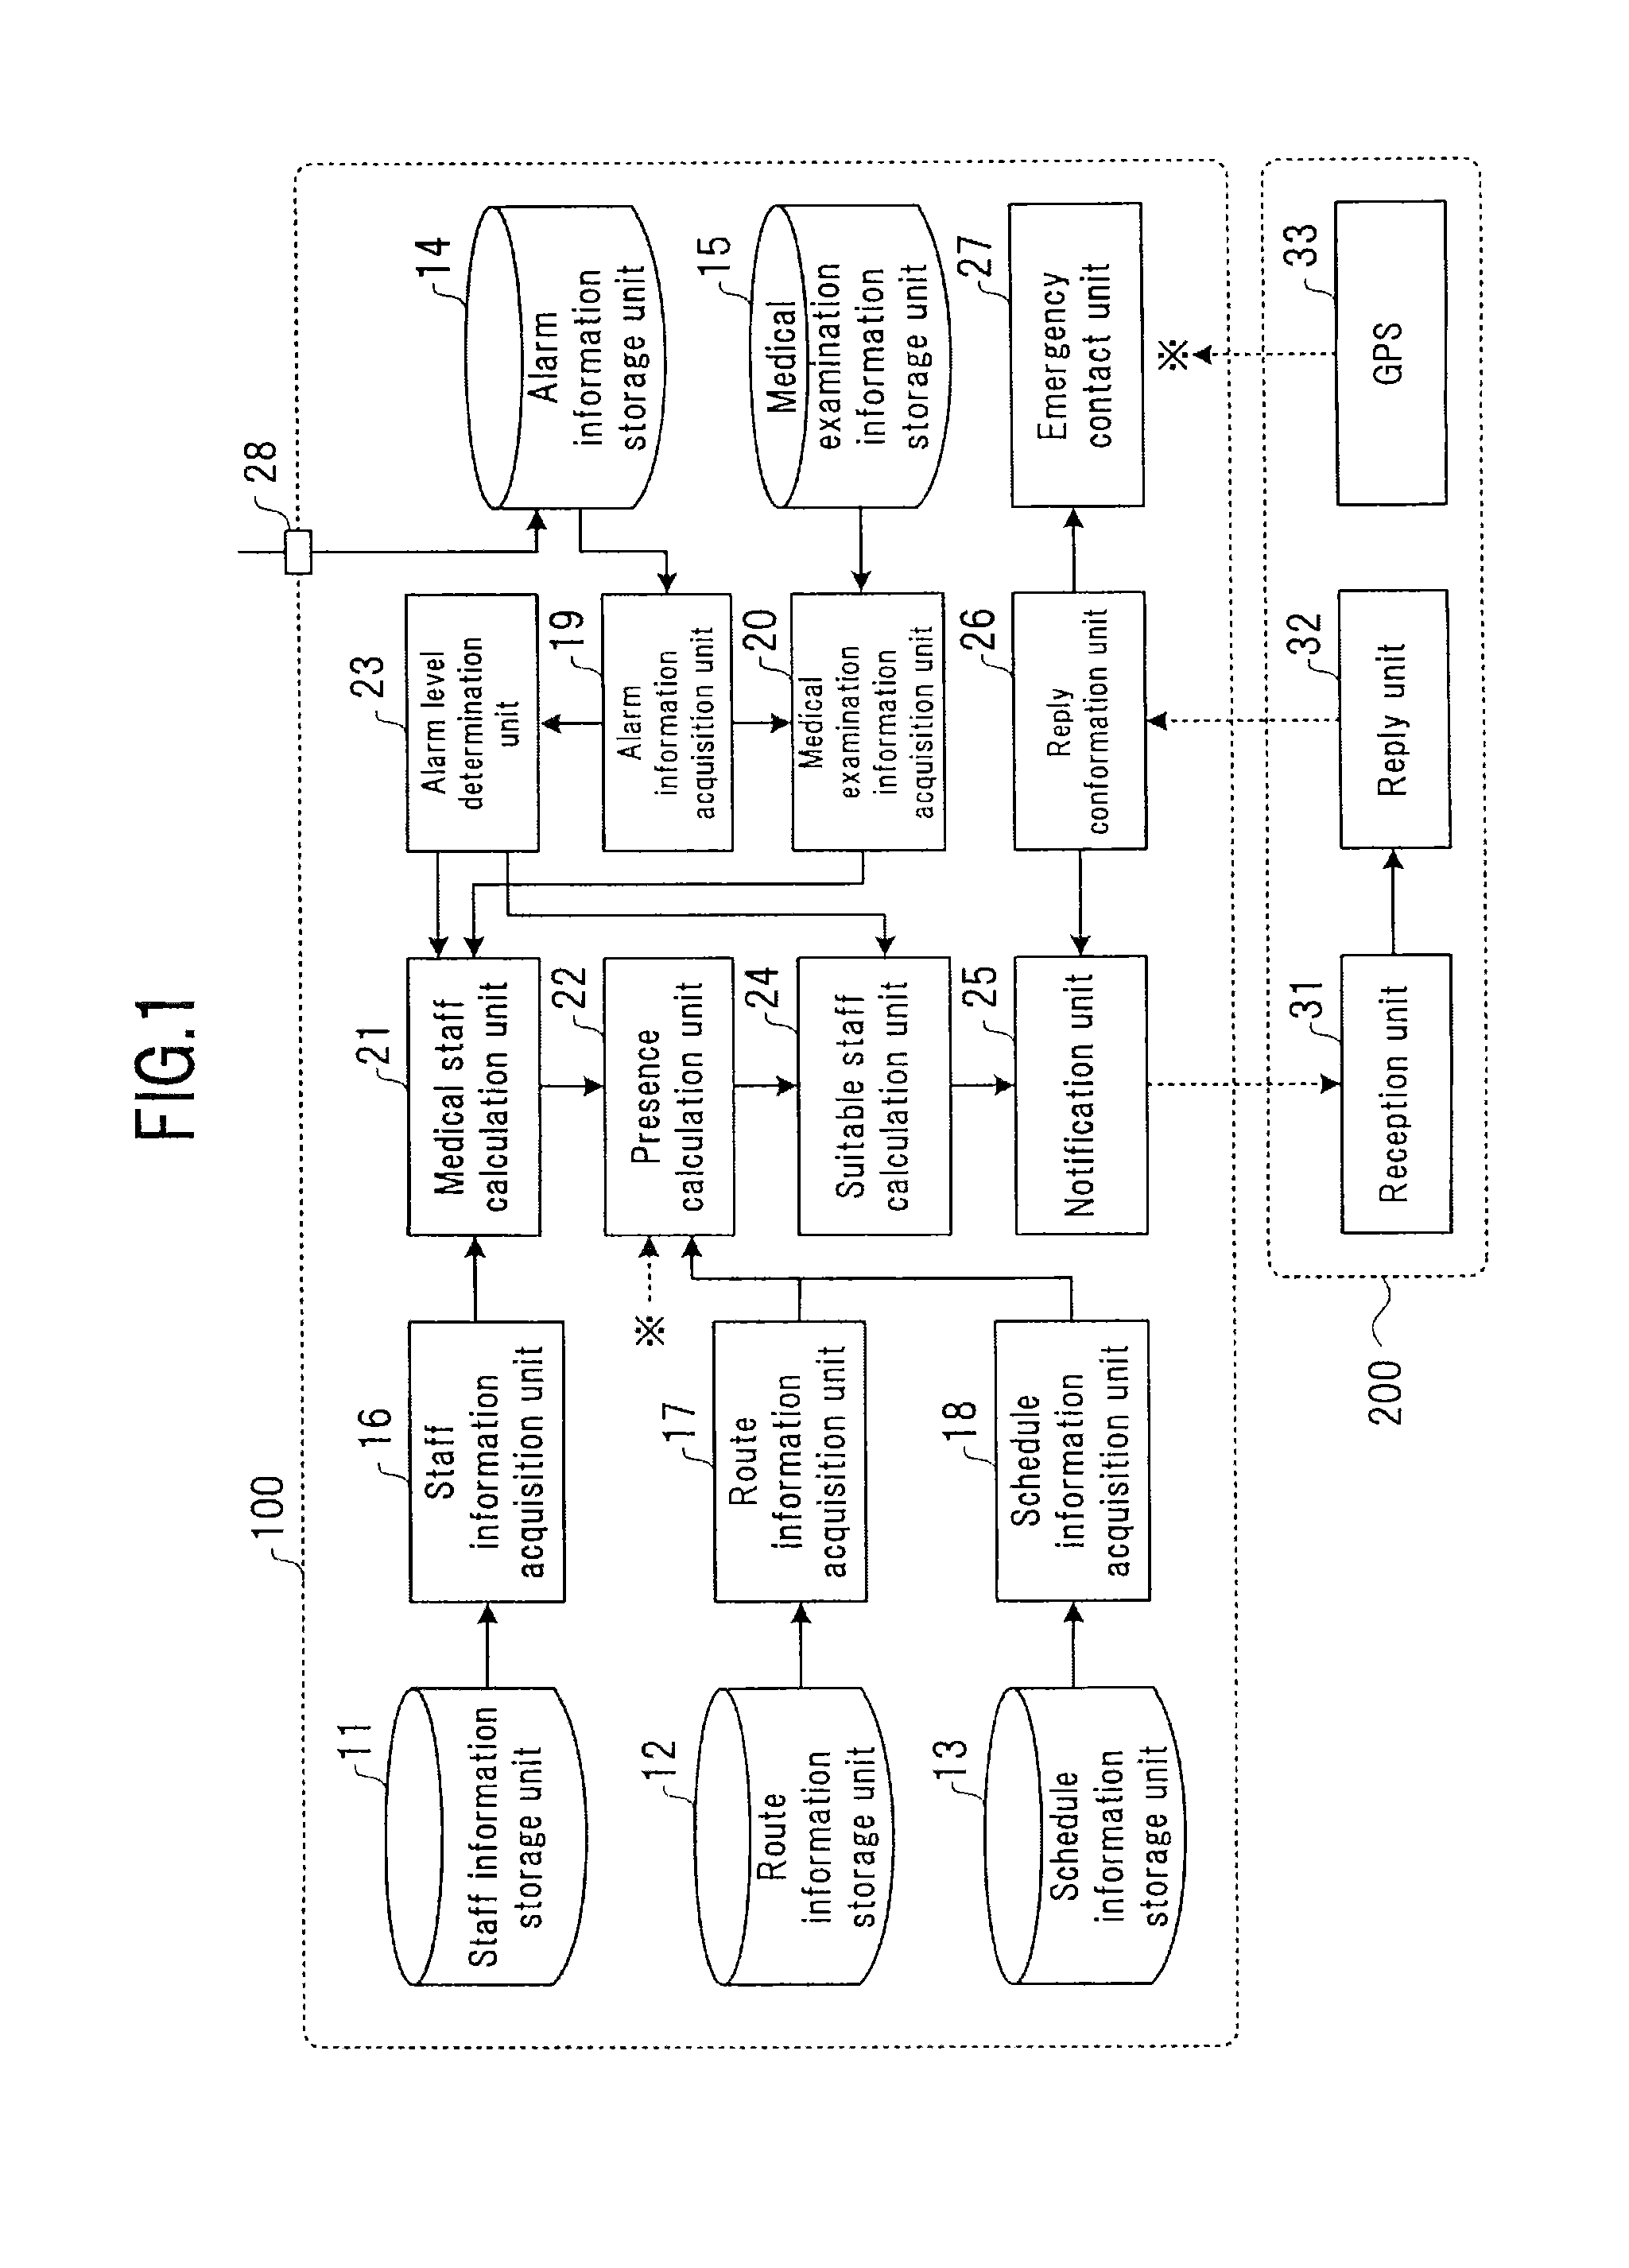 Home medical care support apparatus and home medical care support system